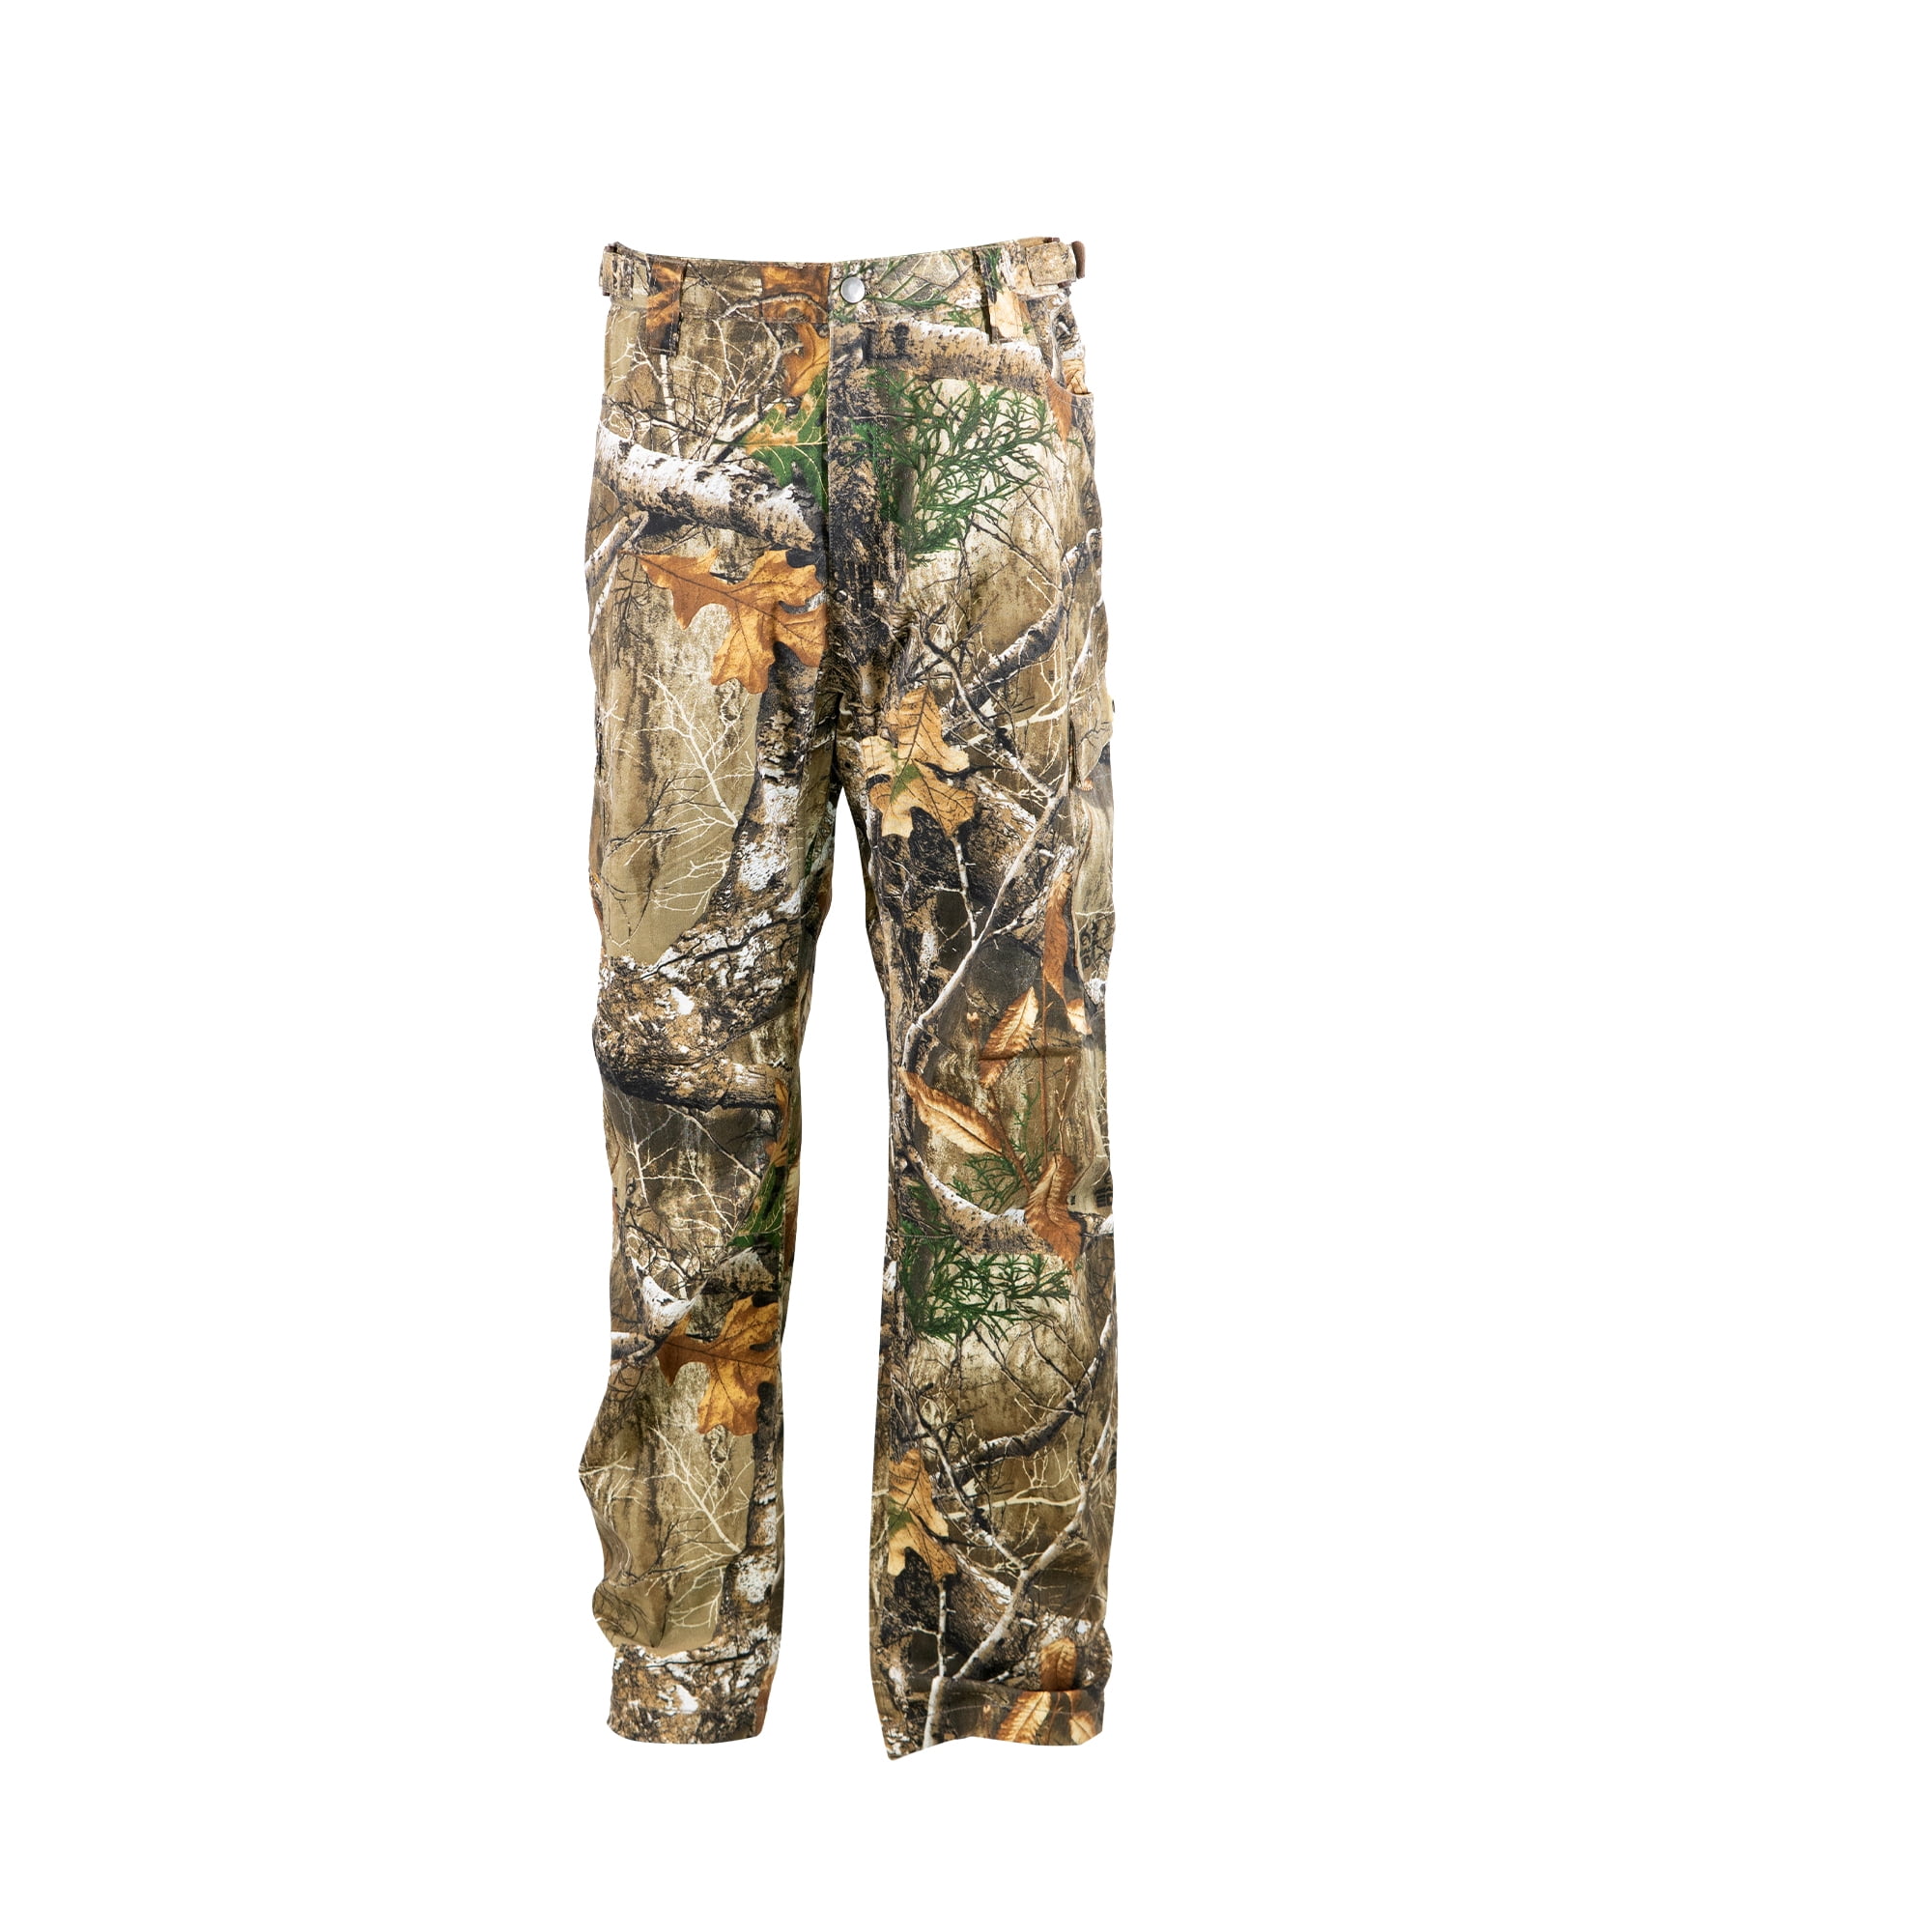 REALTREE Camouflage Waterproof Trousers Hunting Over Trousers Shooting Fishing 